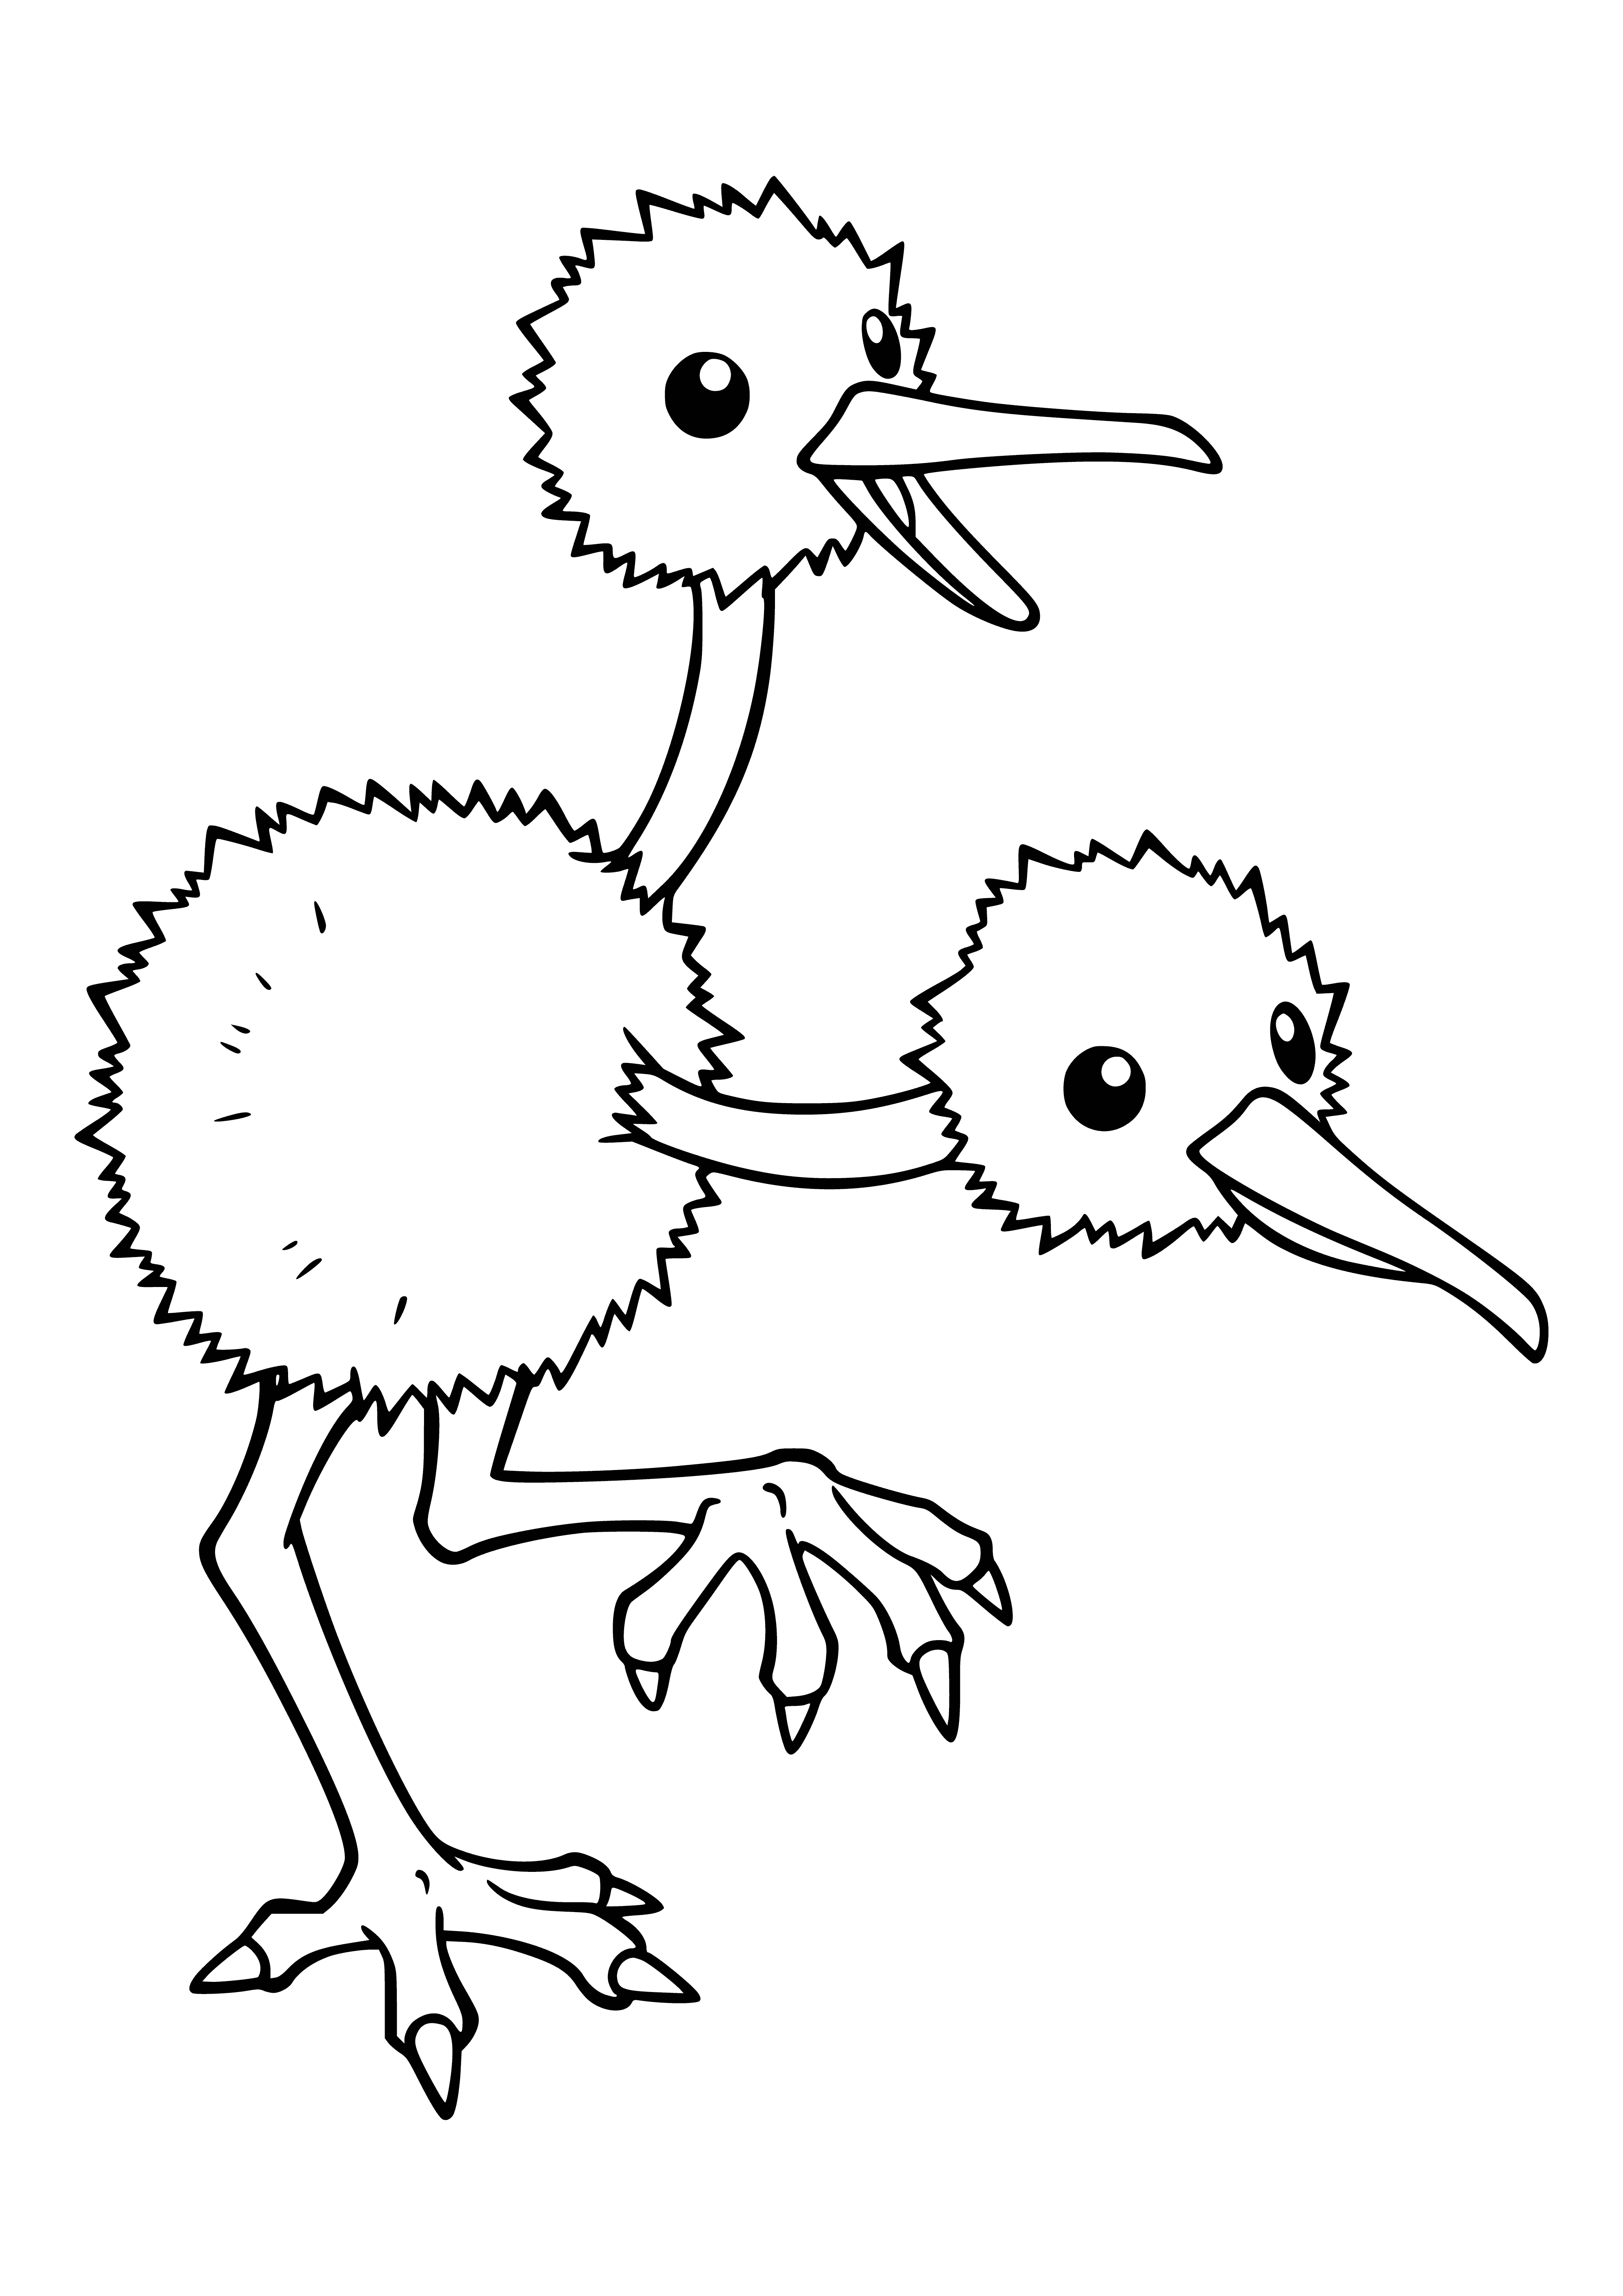 coloring page: Tall and thin bird Pokémon with two long necks, black body, white wings and tail, red head and yellow beak; two long legs, three toes each.